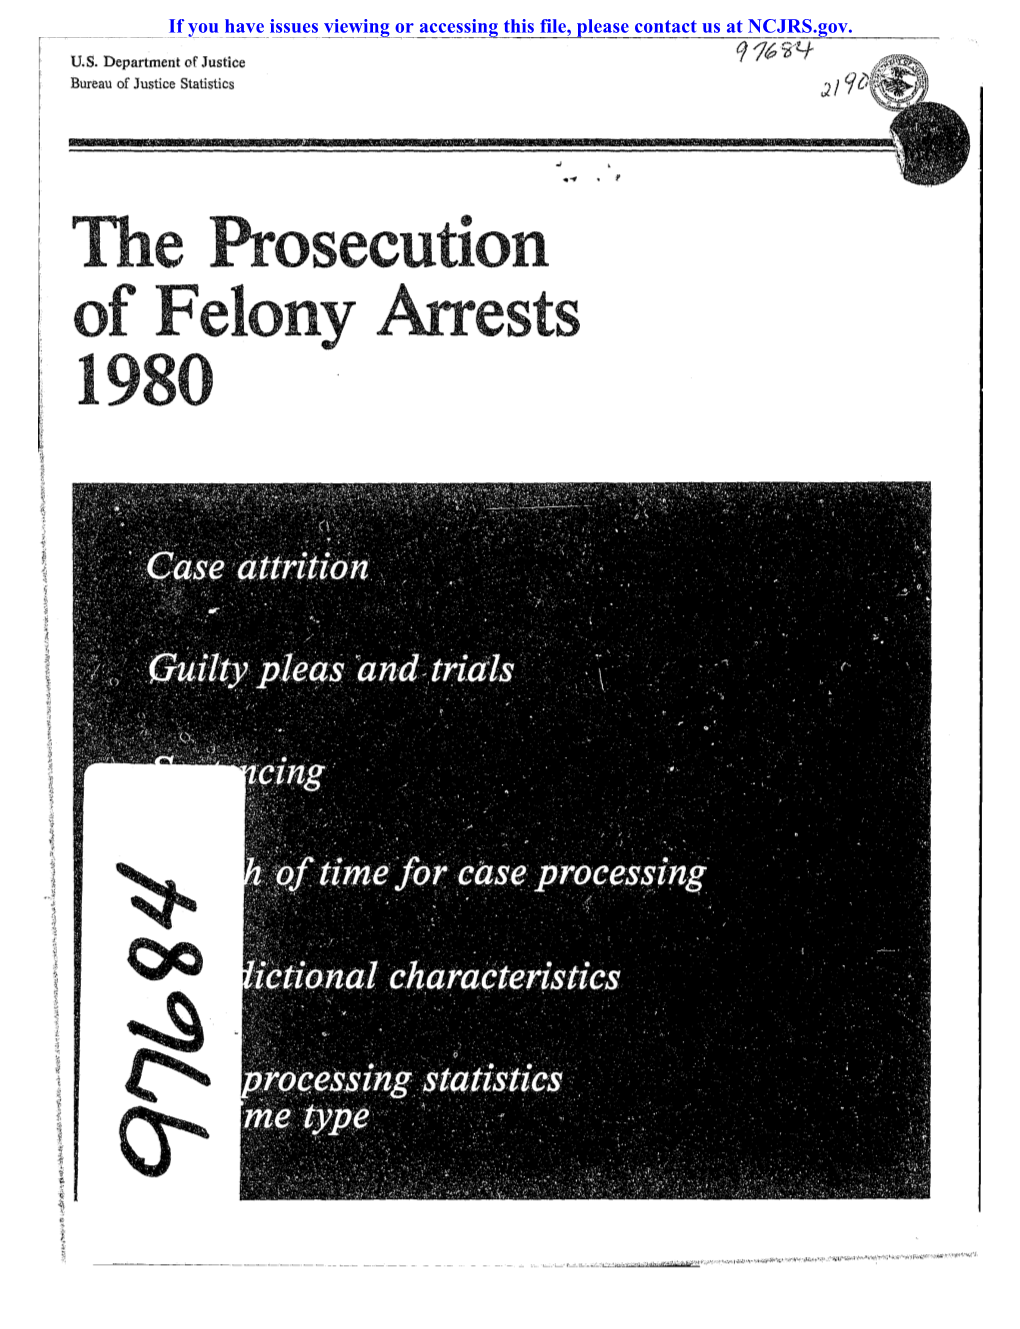 The Prosecution of Felony Arrests